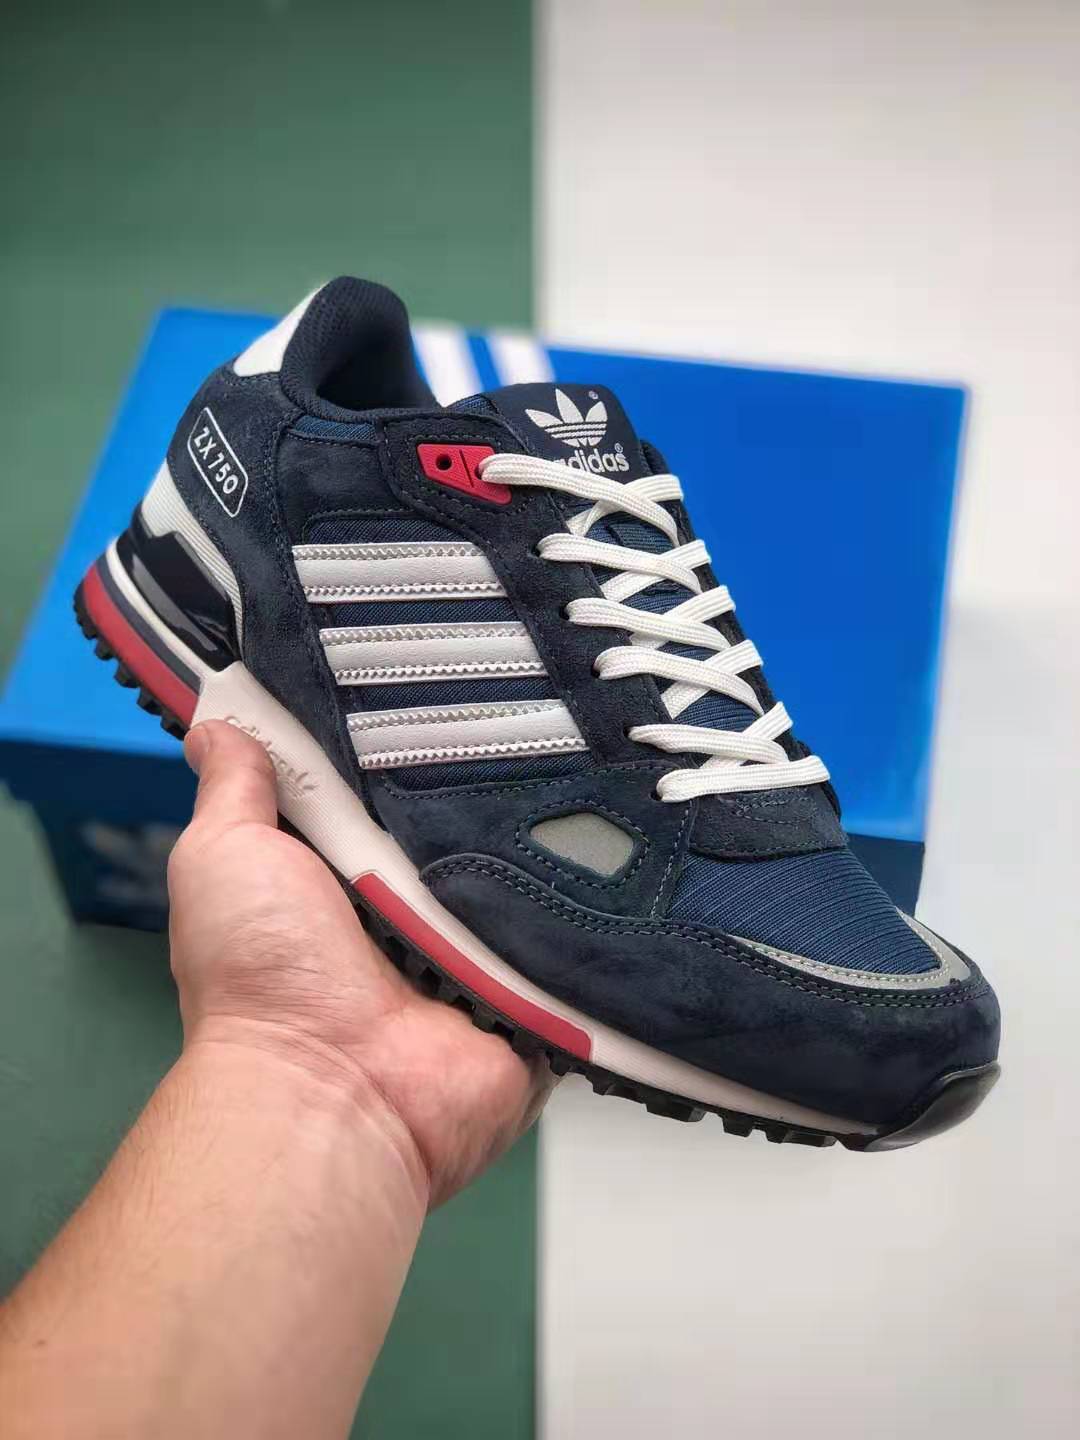 Adidas Originals ZX 750 Navy Blue Cloud White Shoes Q35065 - Stylish and Comfy Footwear